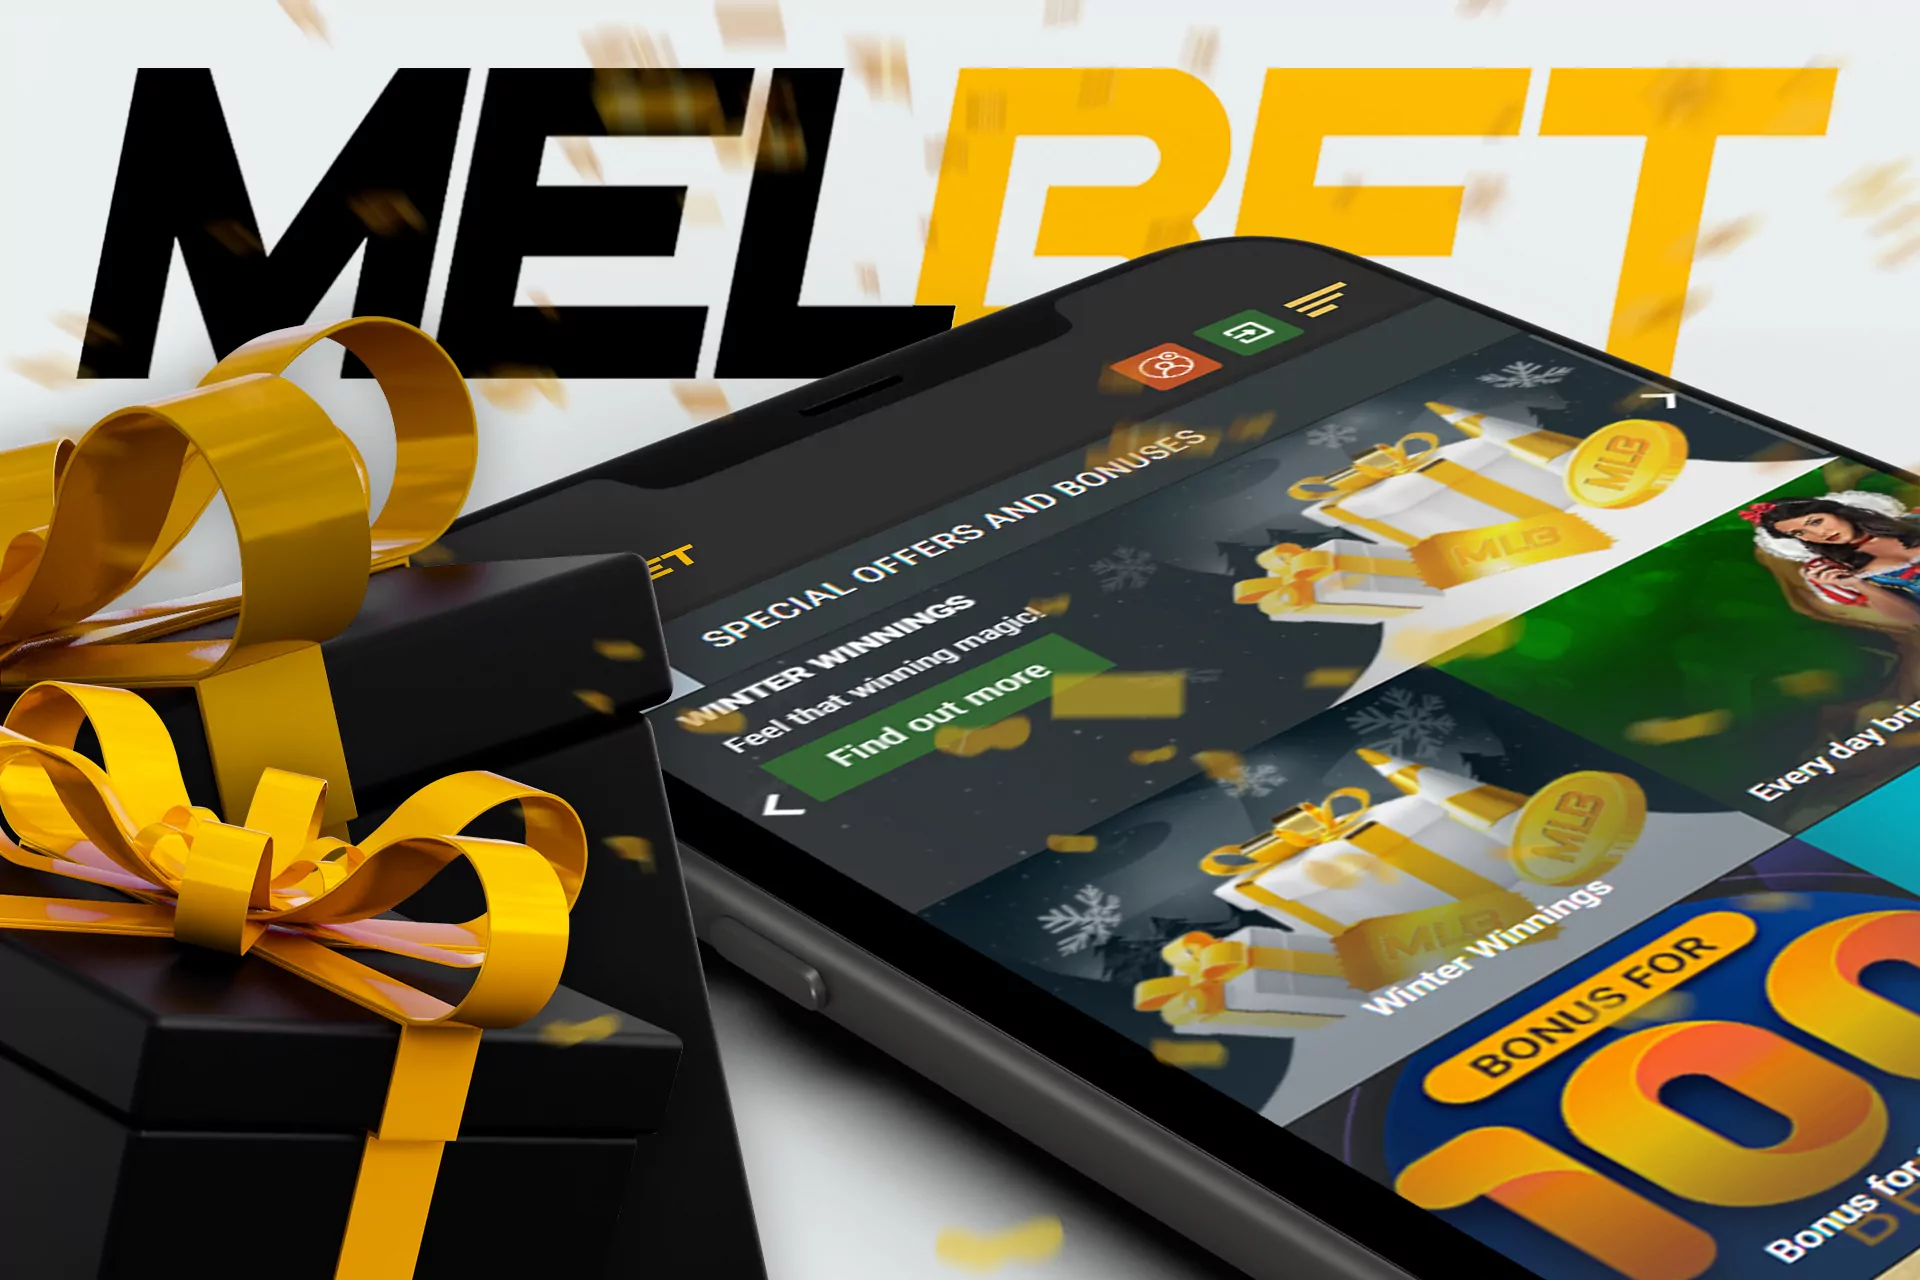 You can read more about Melbet bonus offers in the app or on our website.